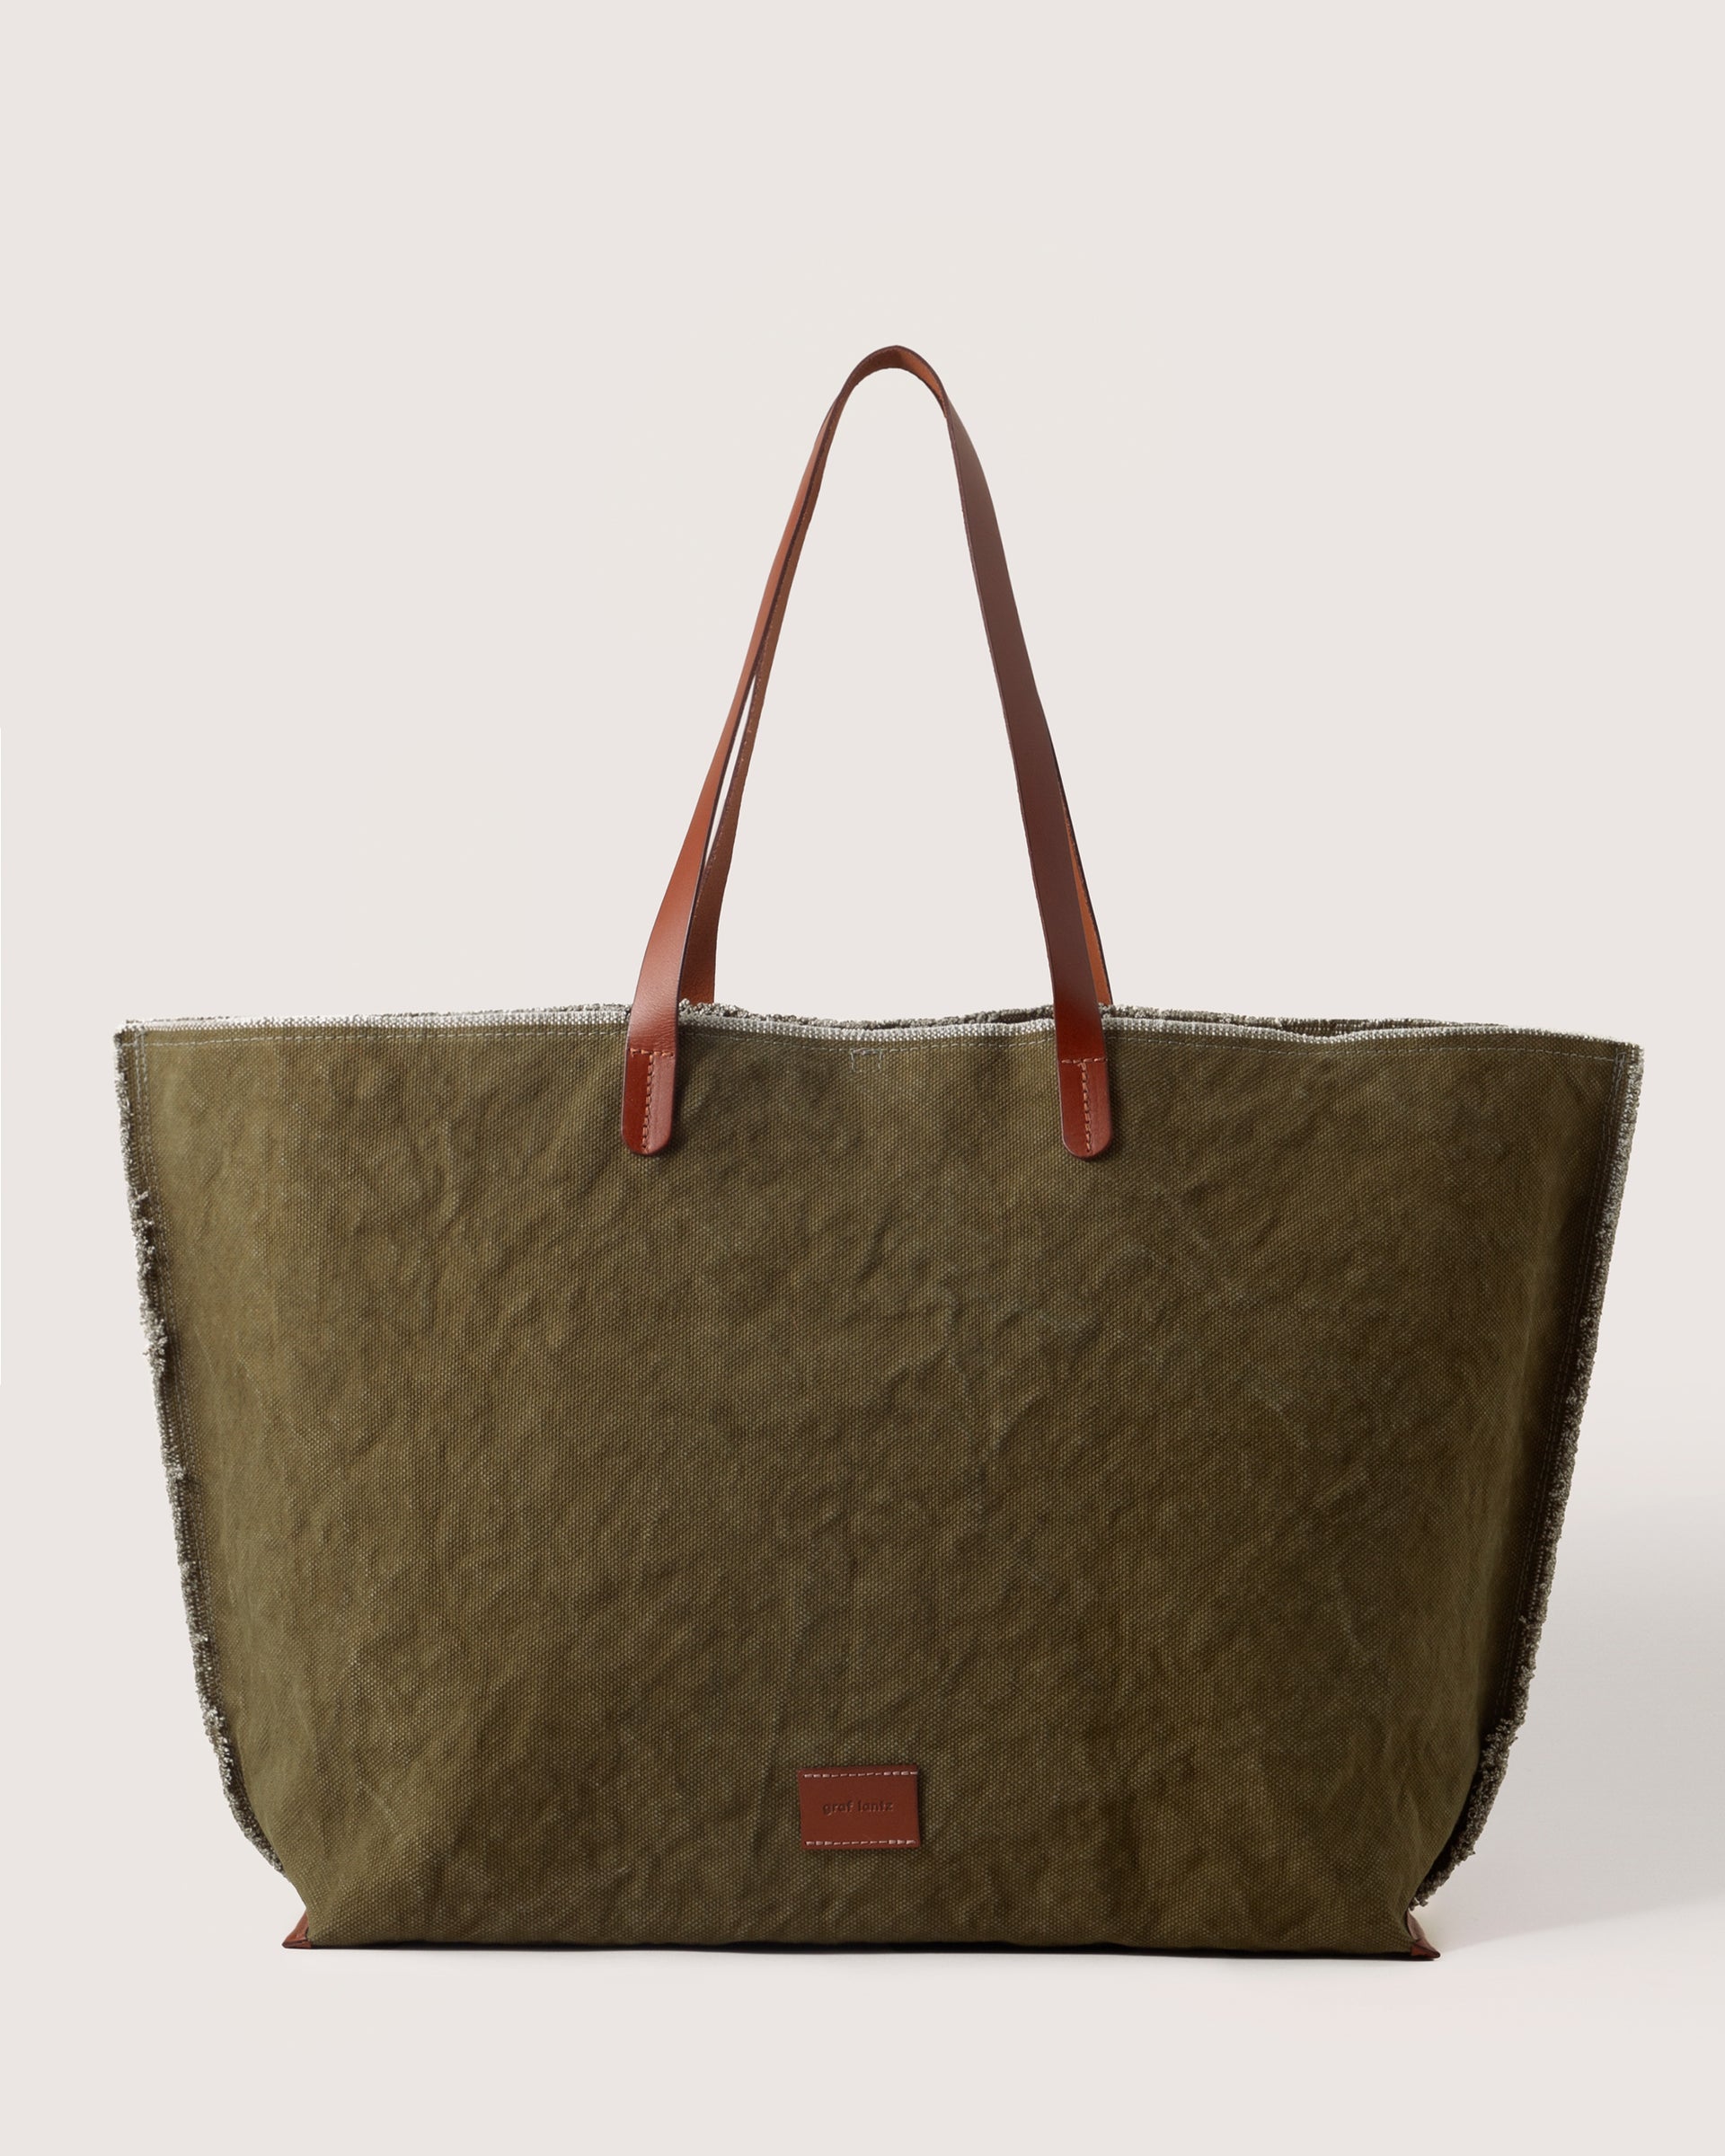 A Hana Canvas Boat Bag in Olive Sienna with dark brown leather handle, white background